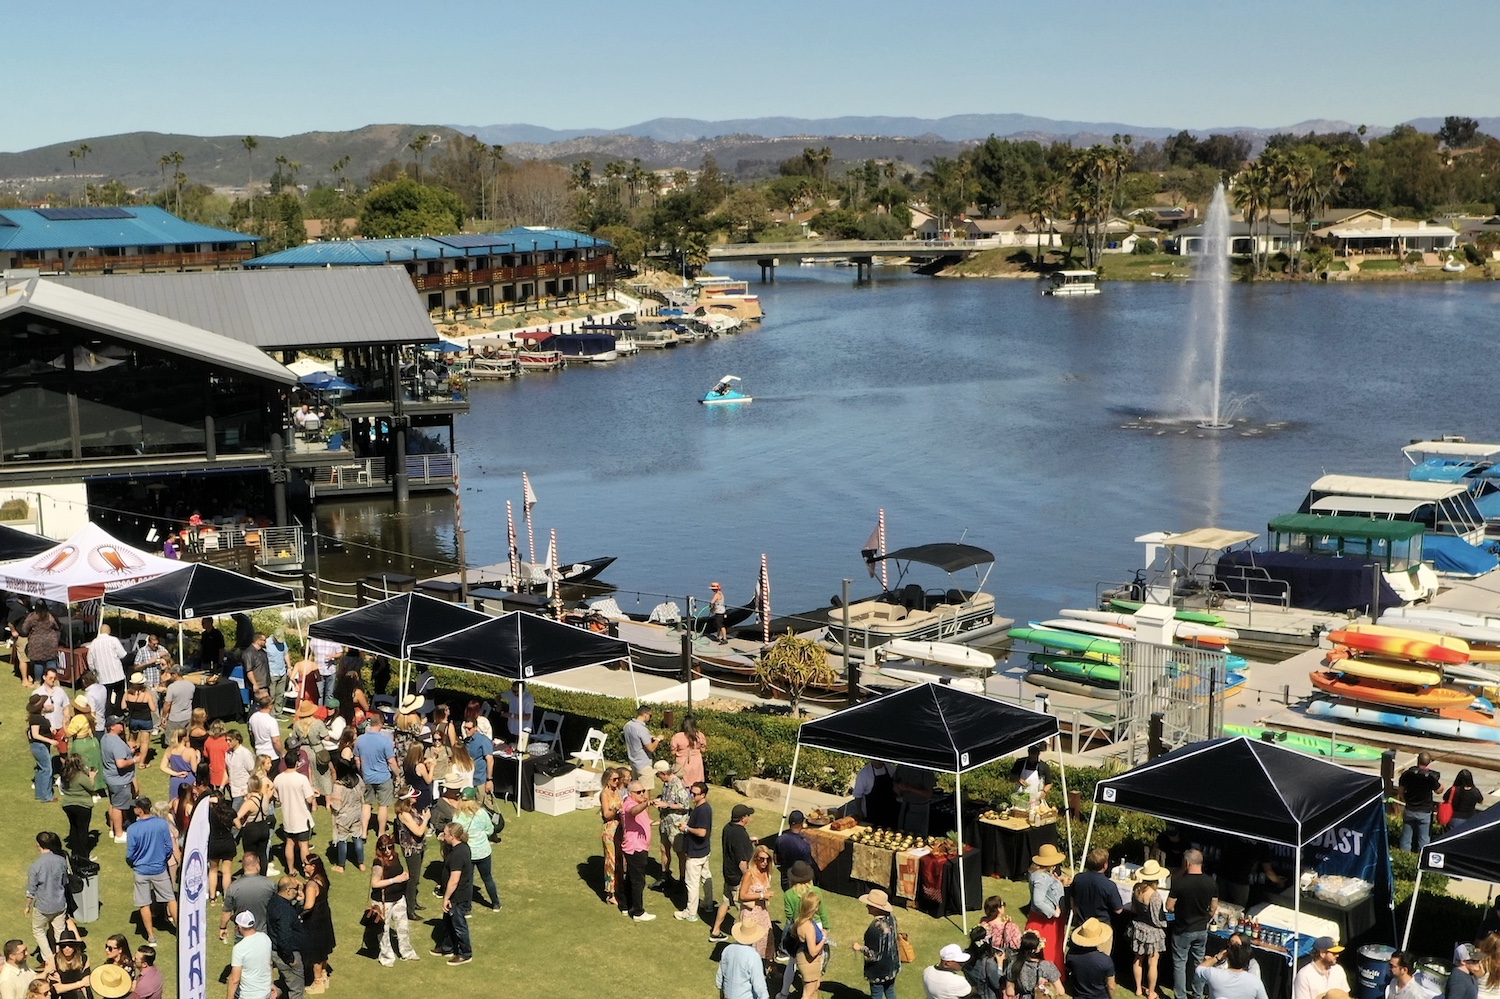 The Lakehouse Resort during the Third Annual Food and Wine Festival in San Marcos, San Diego